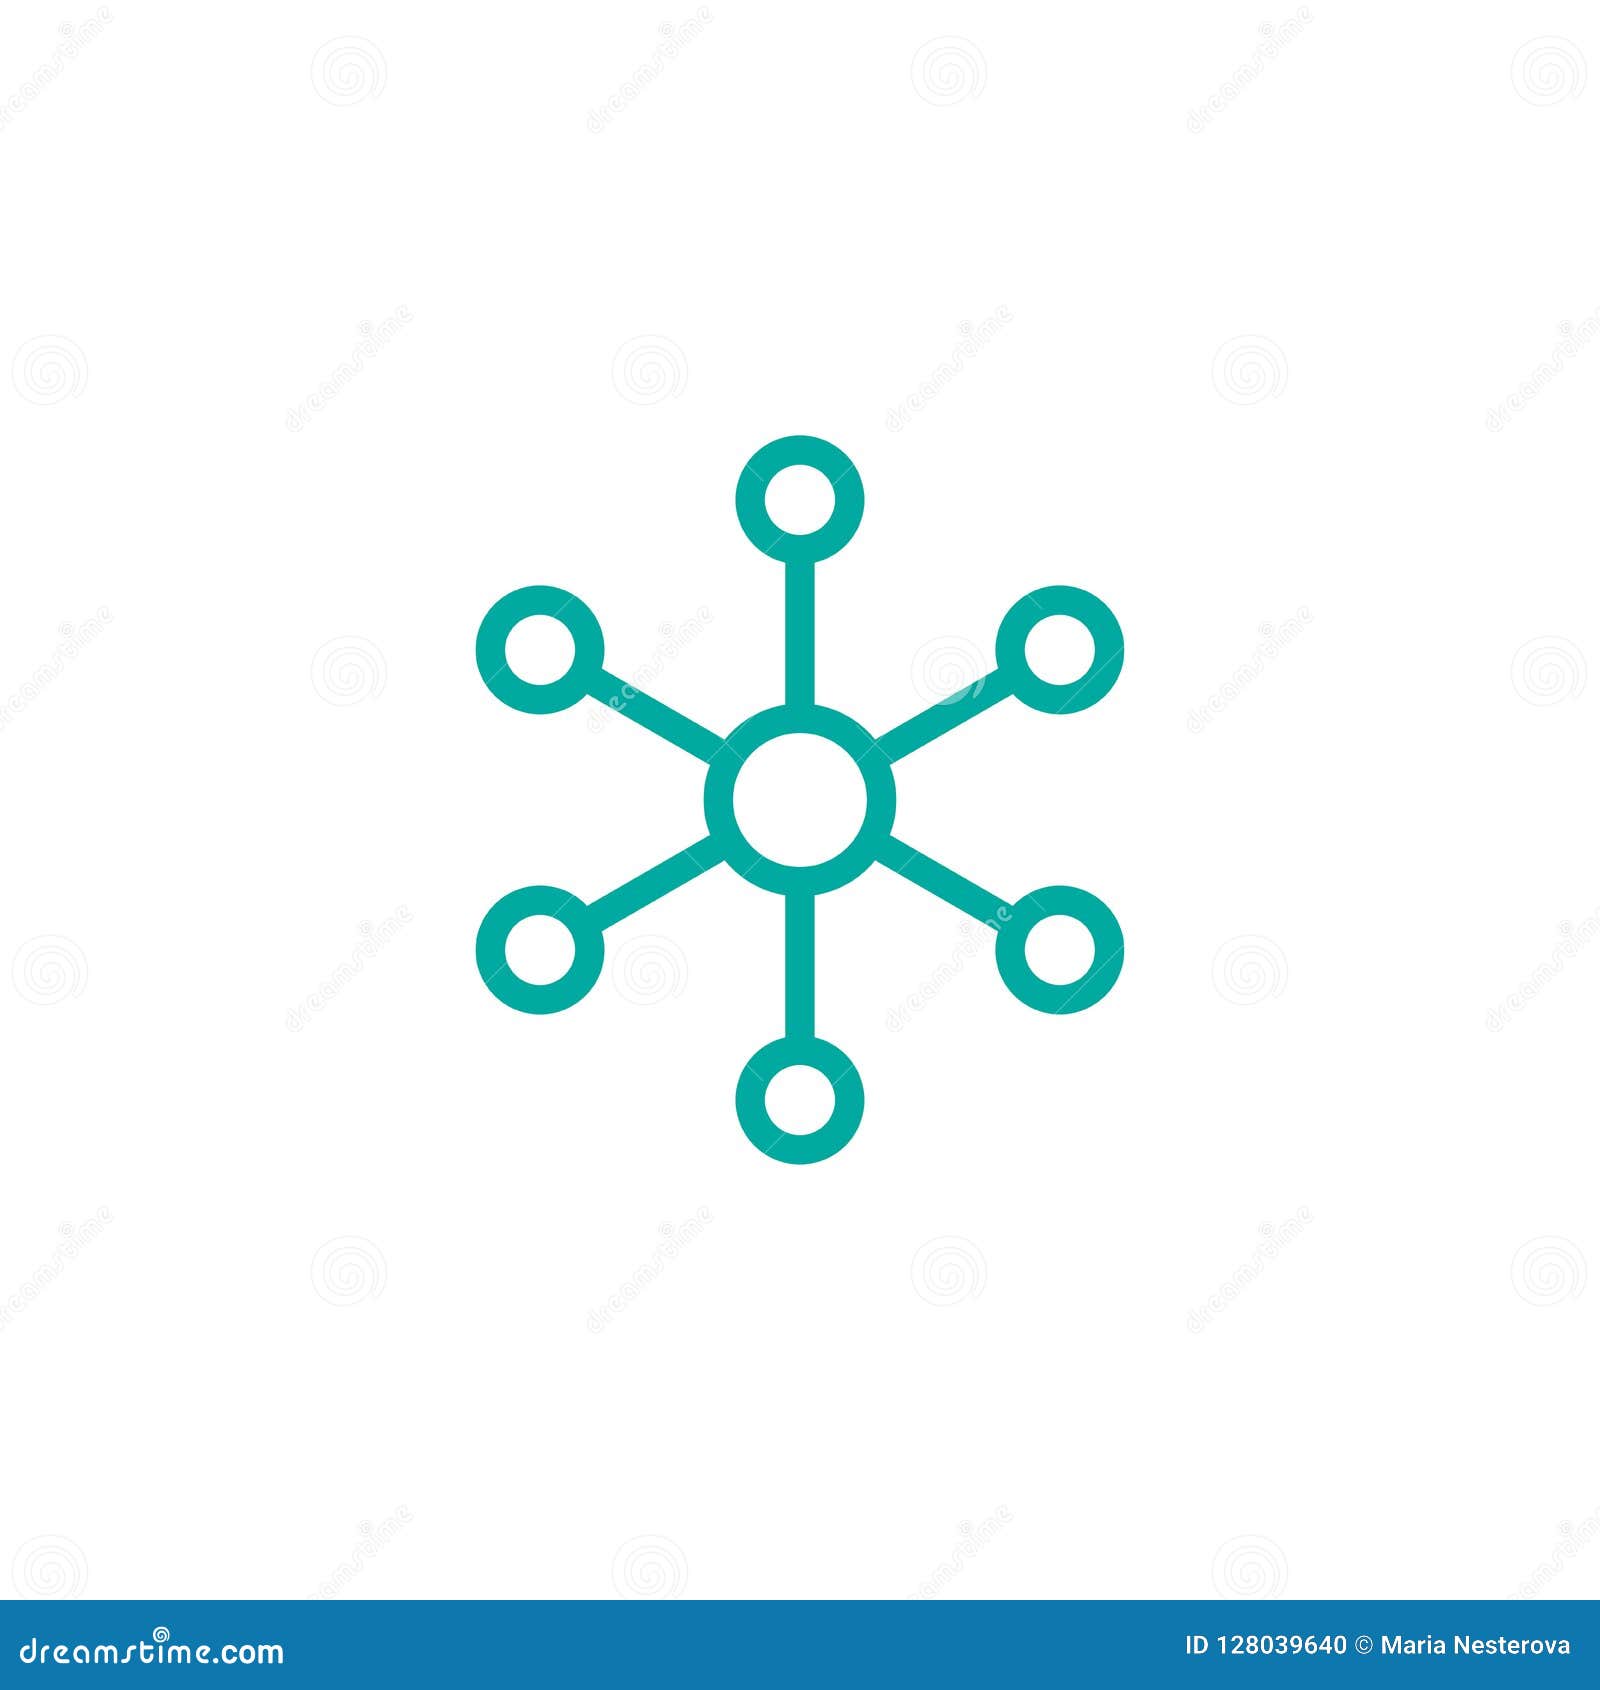 hub network connection line icon  on white. tech or technology logo. server or central database button.